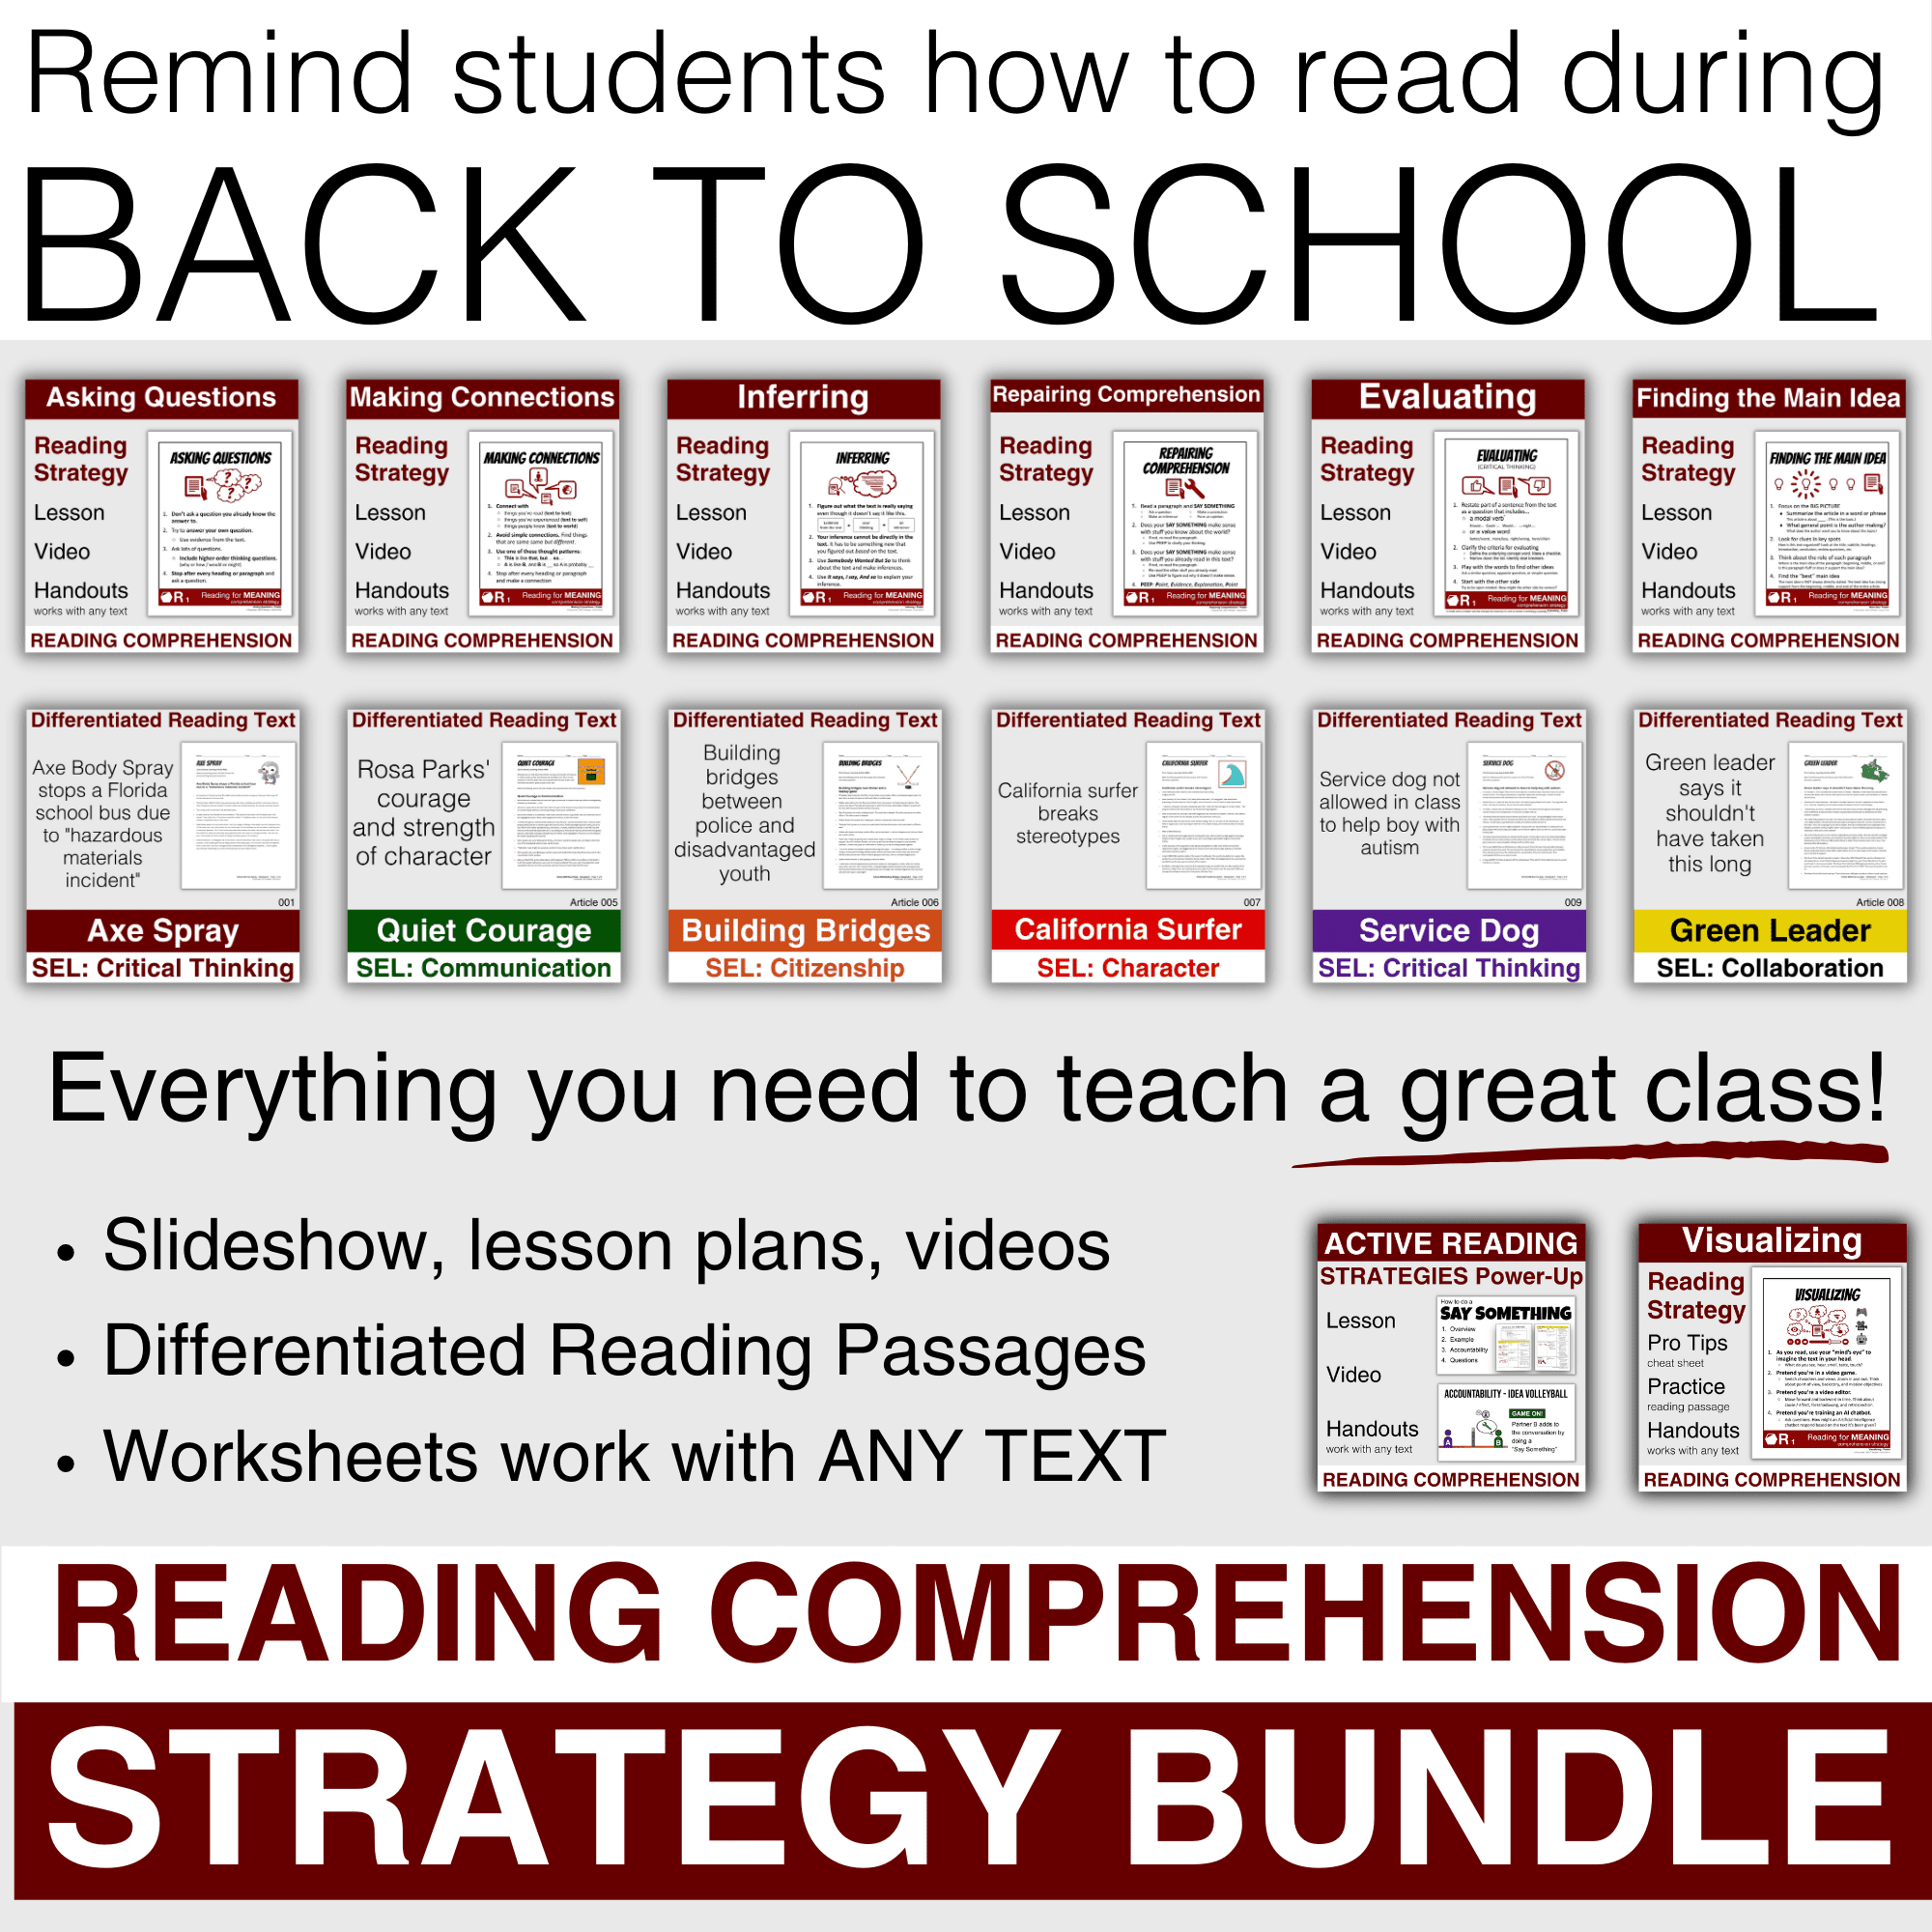 Remind Students How To Read During Back To School - Reading Comprehension Strategy PDF Bundle